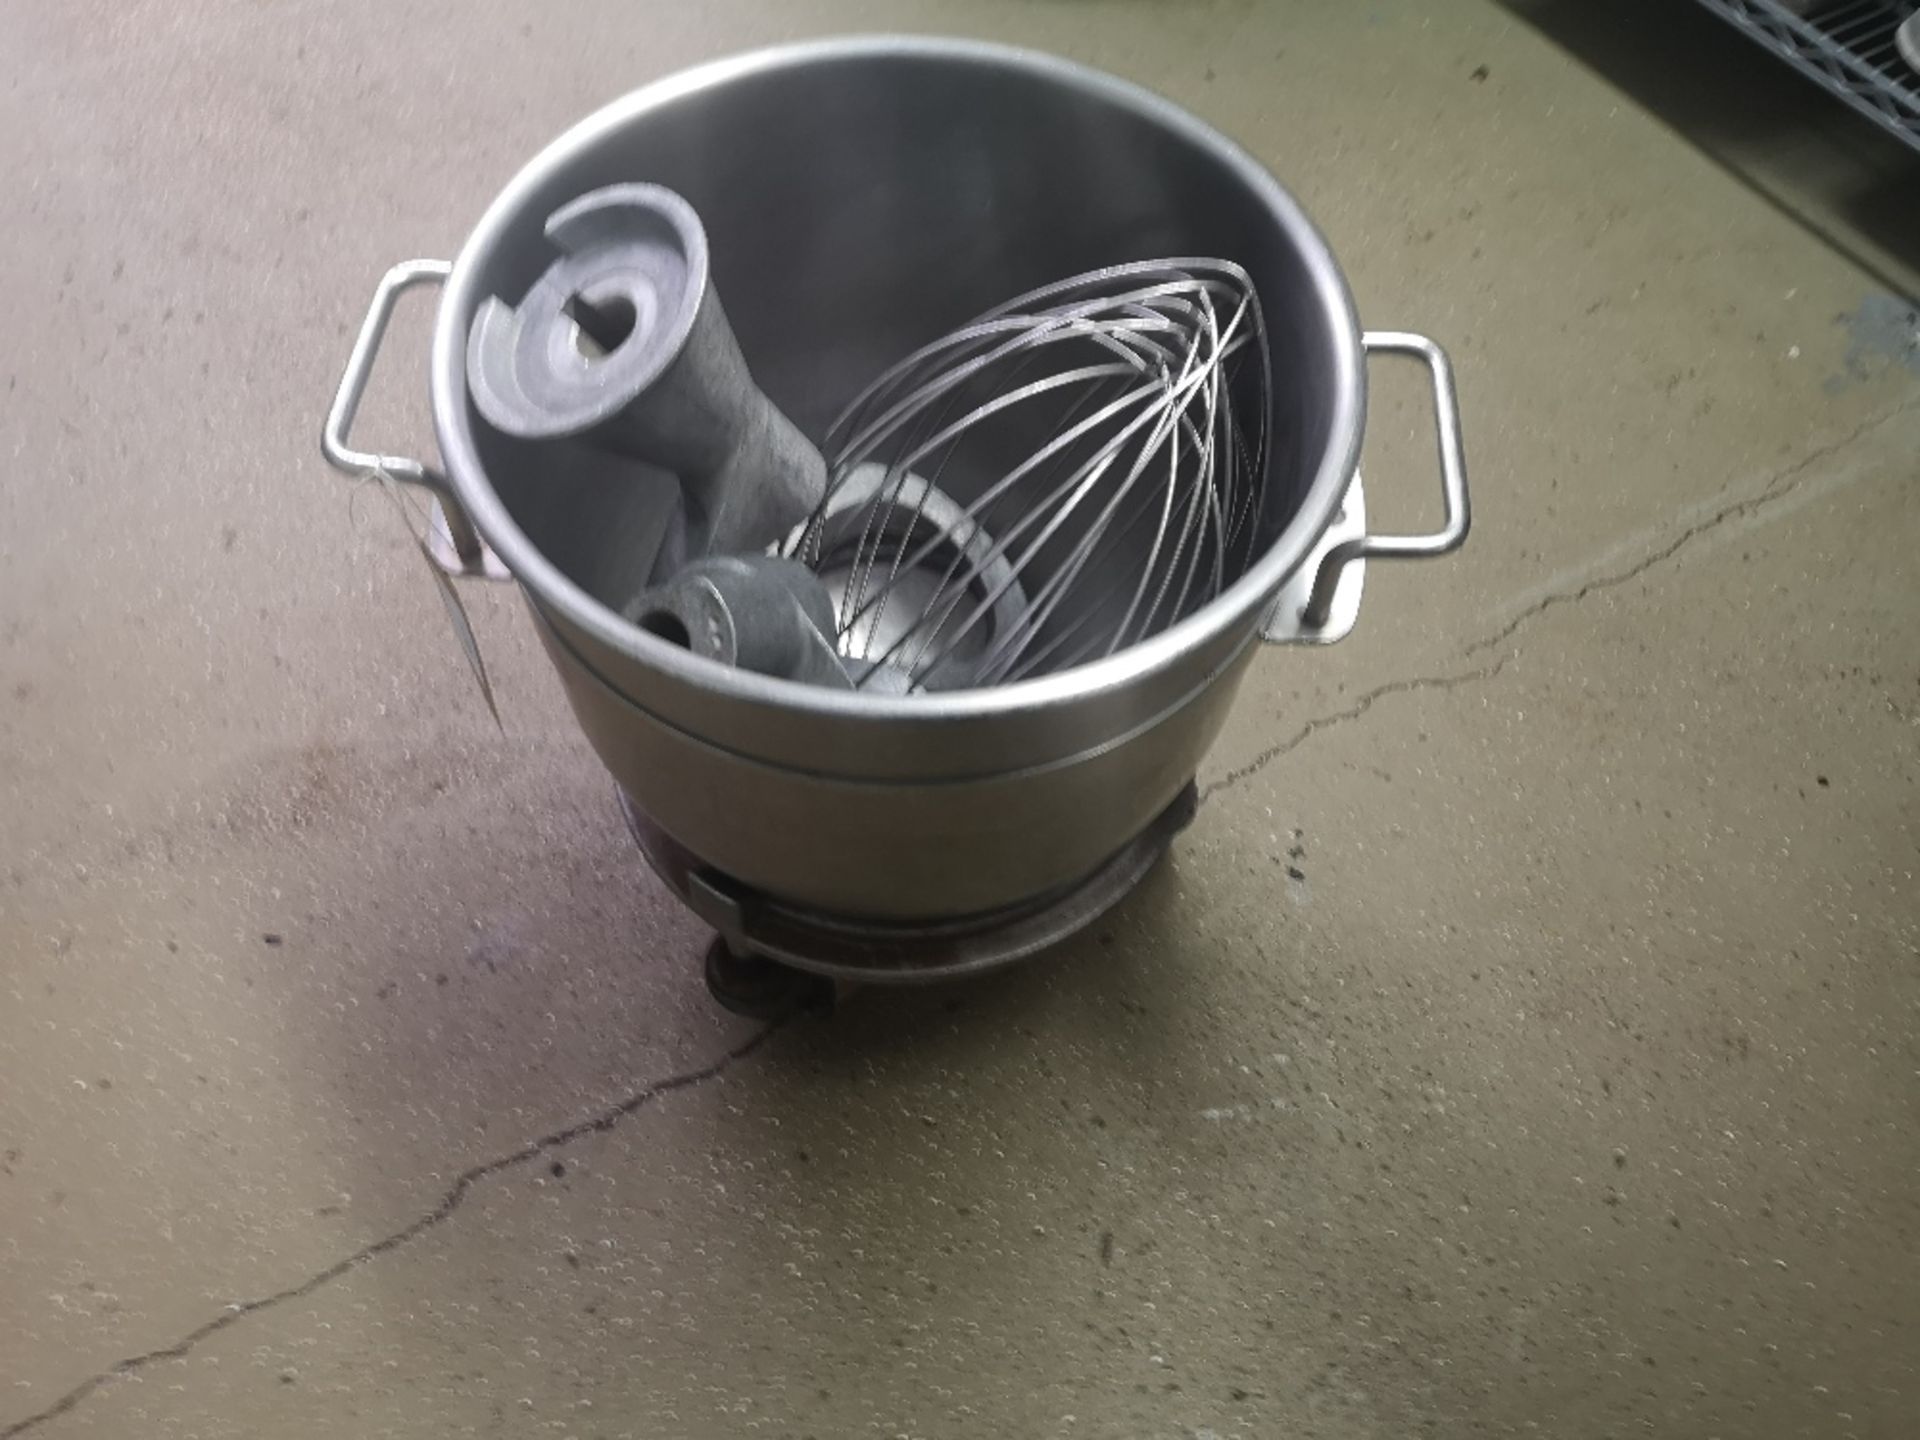 Stainless Steel Planetary Mixing Bowl with (4) Whisk Attachments & Mobile Dolly - Image 2 of 4